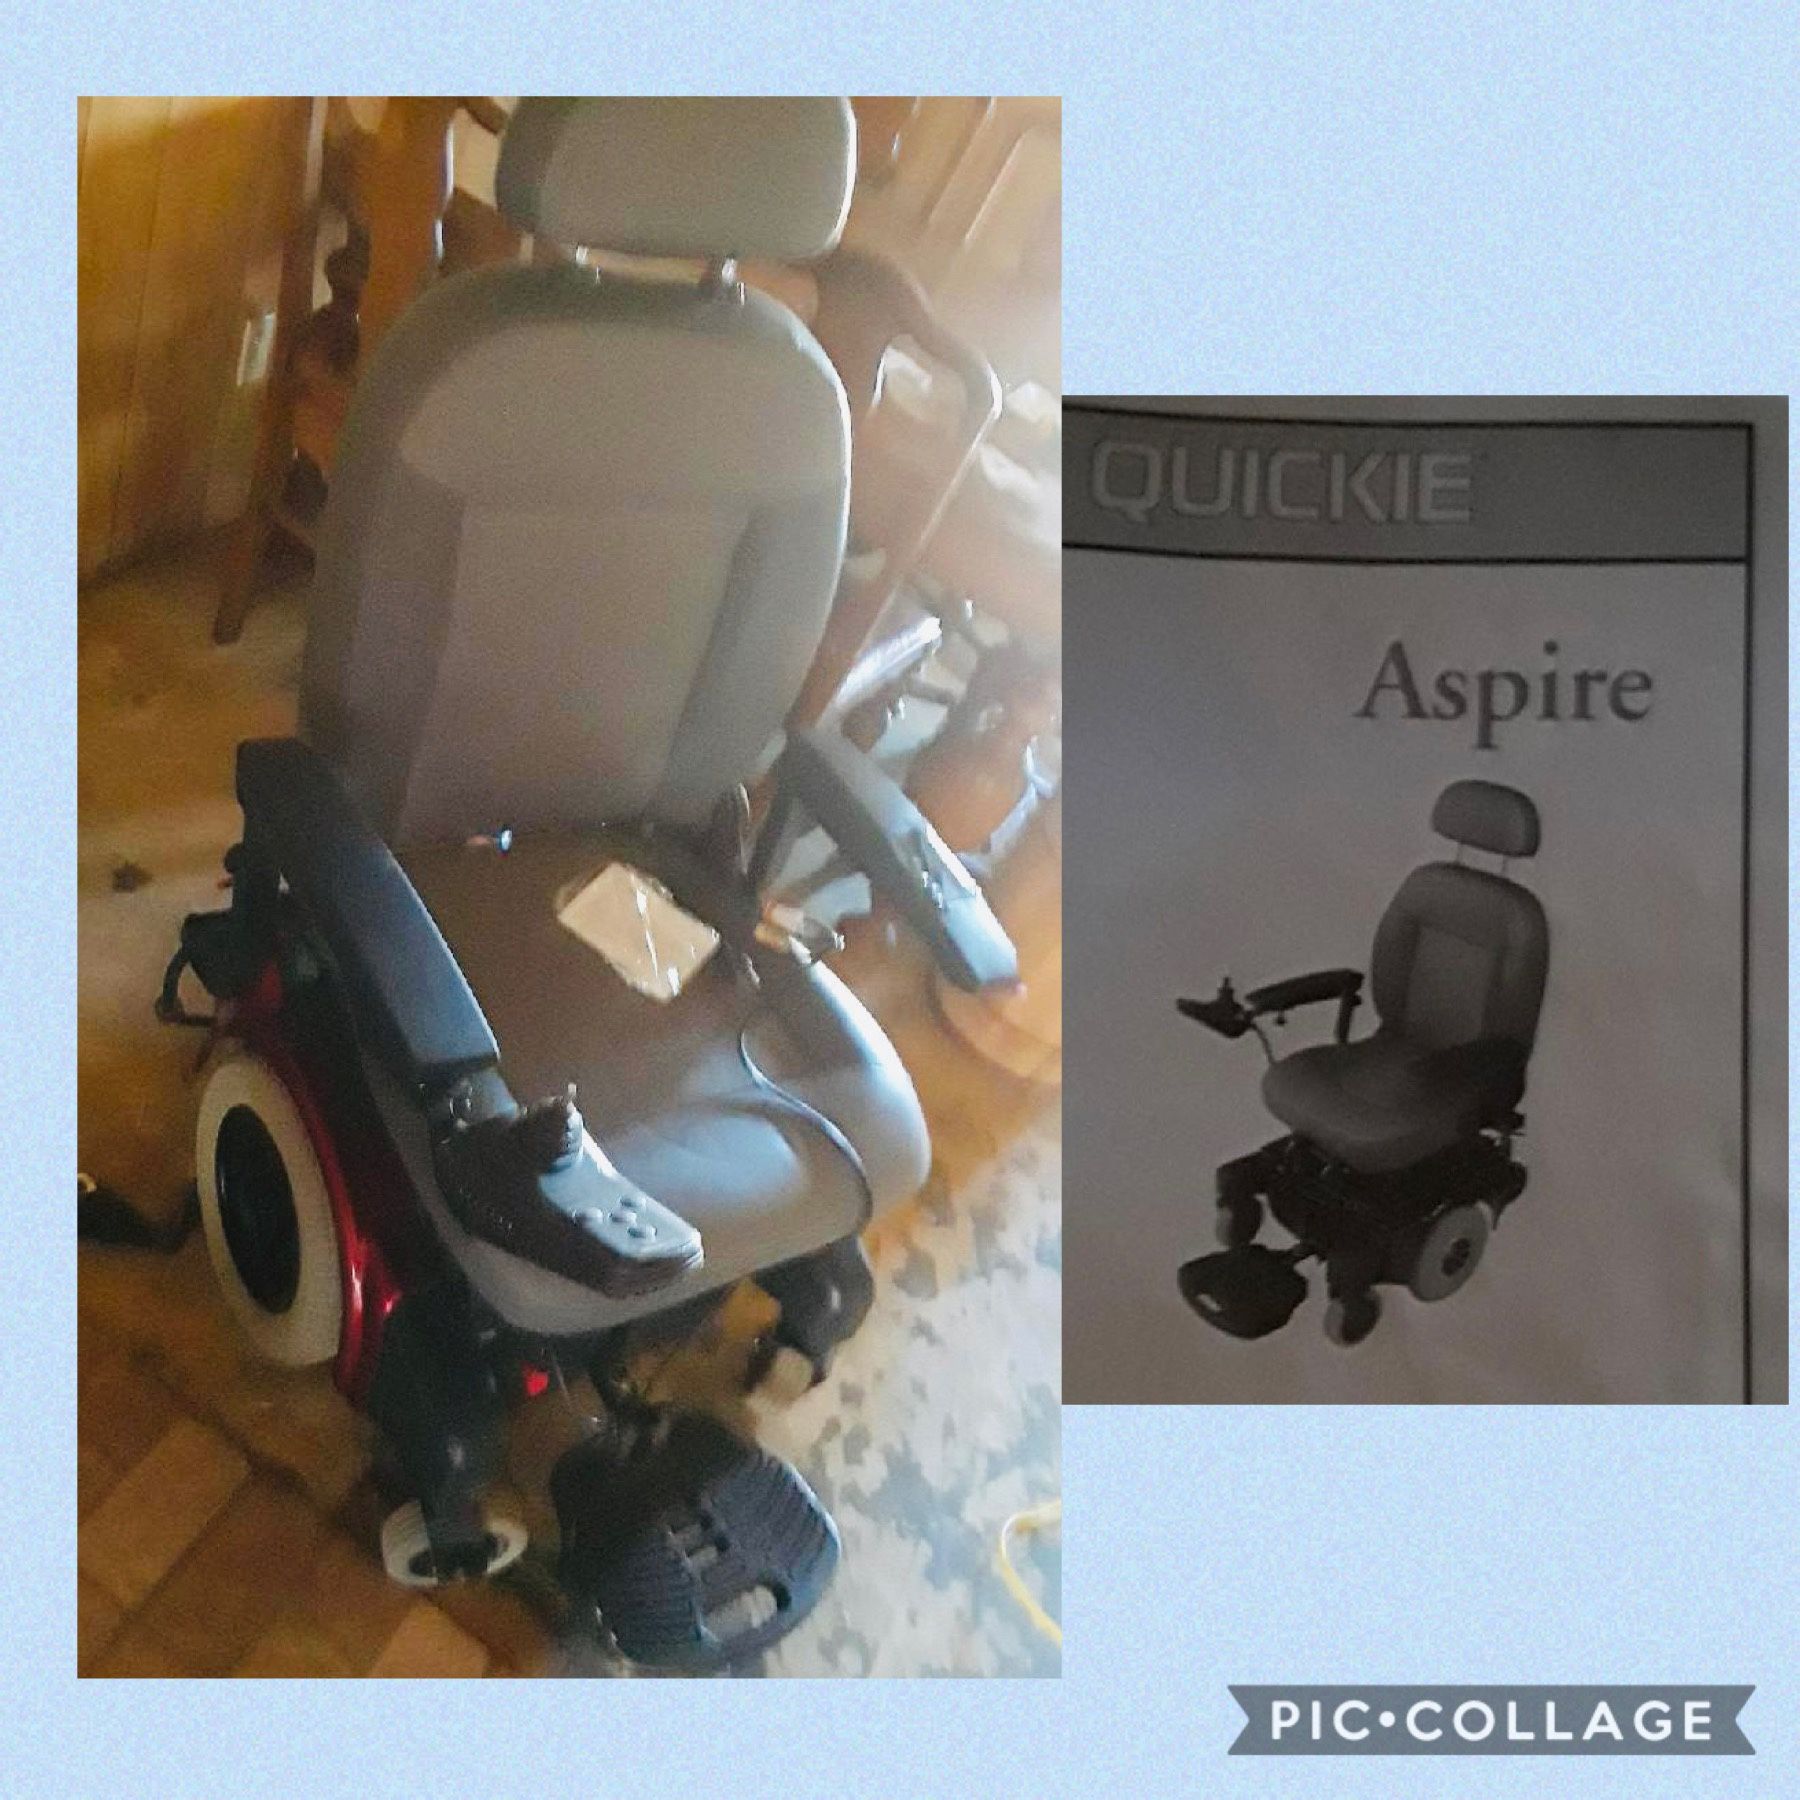 Aspire Quickie motorized mobility chair